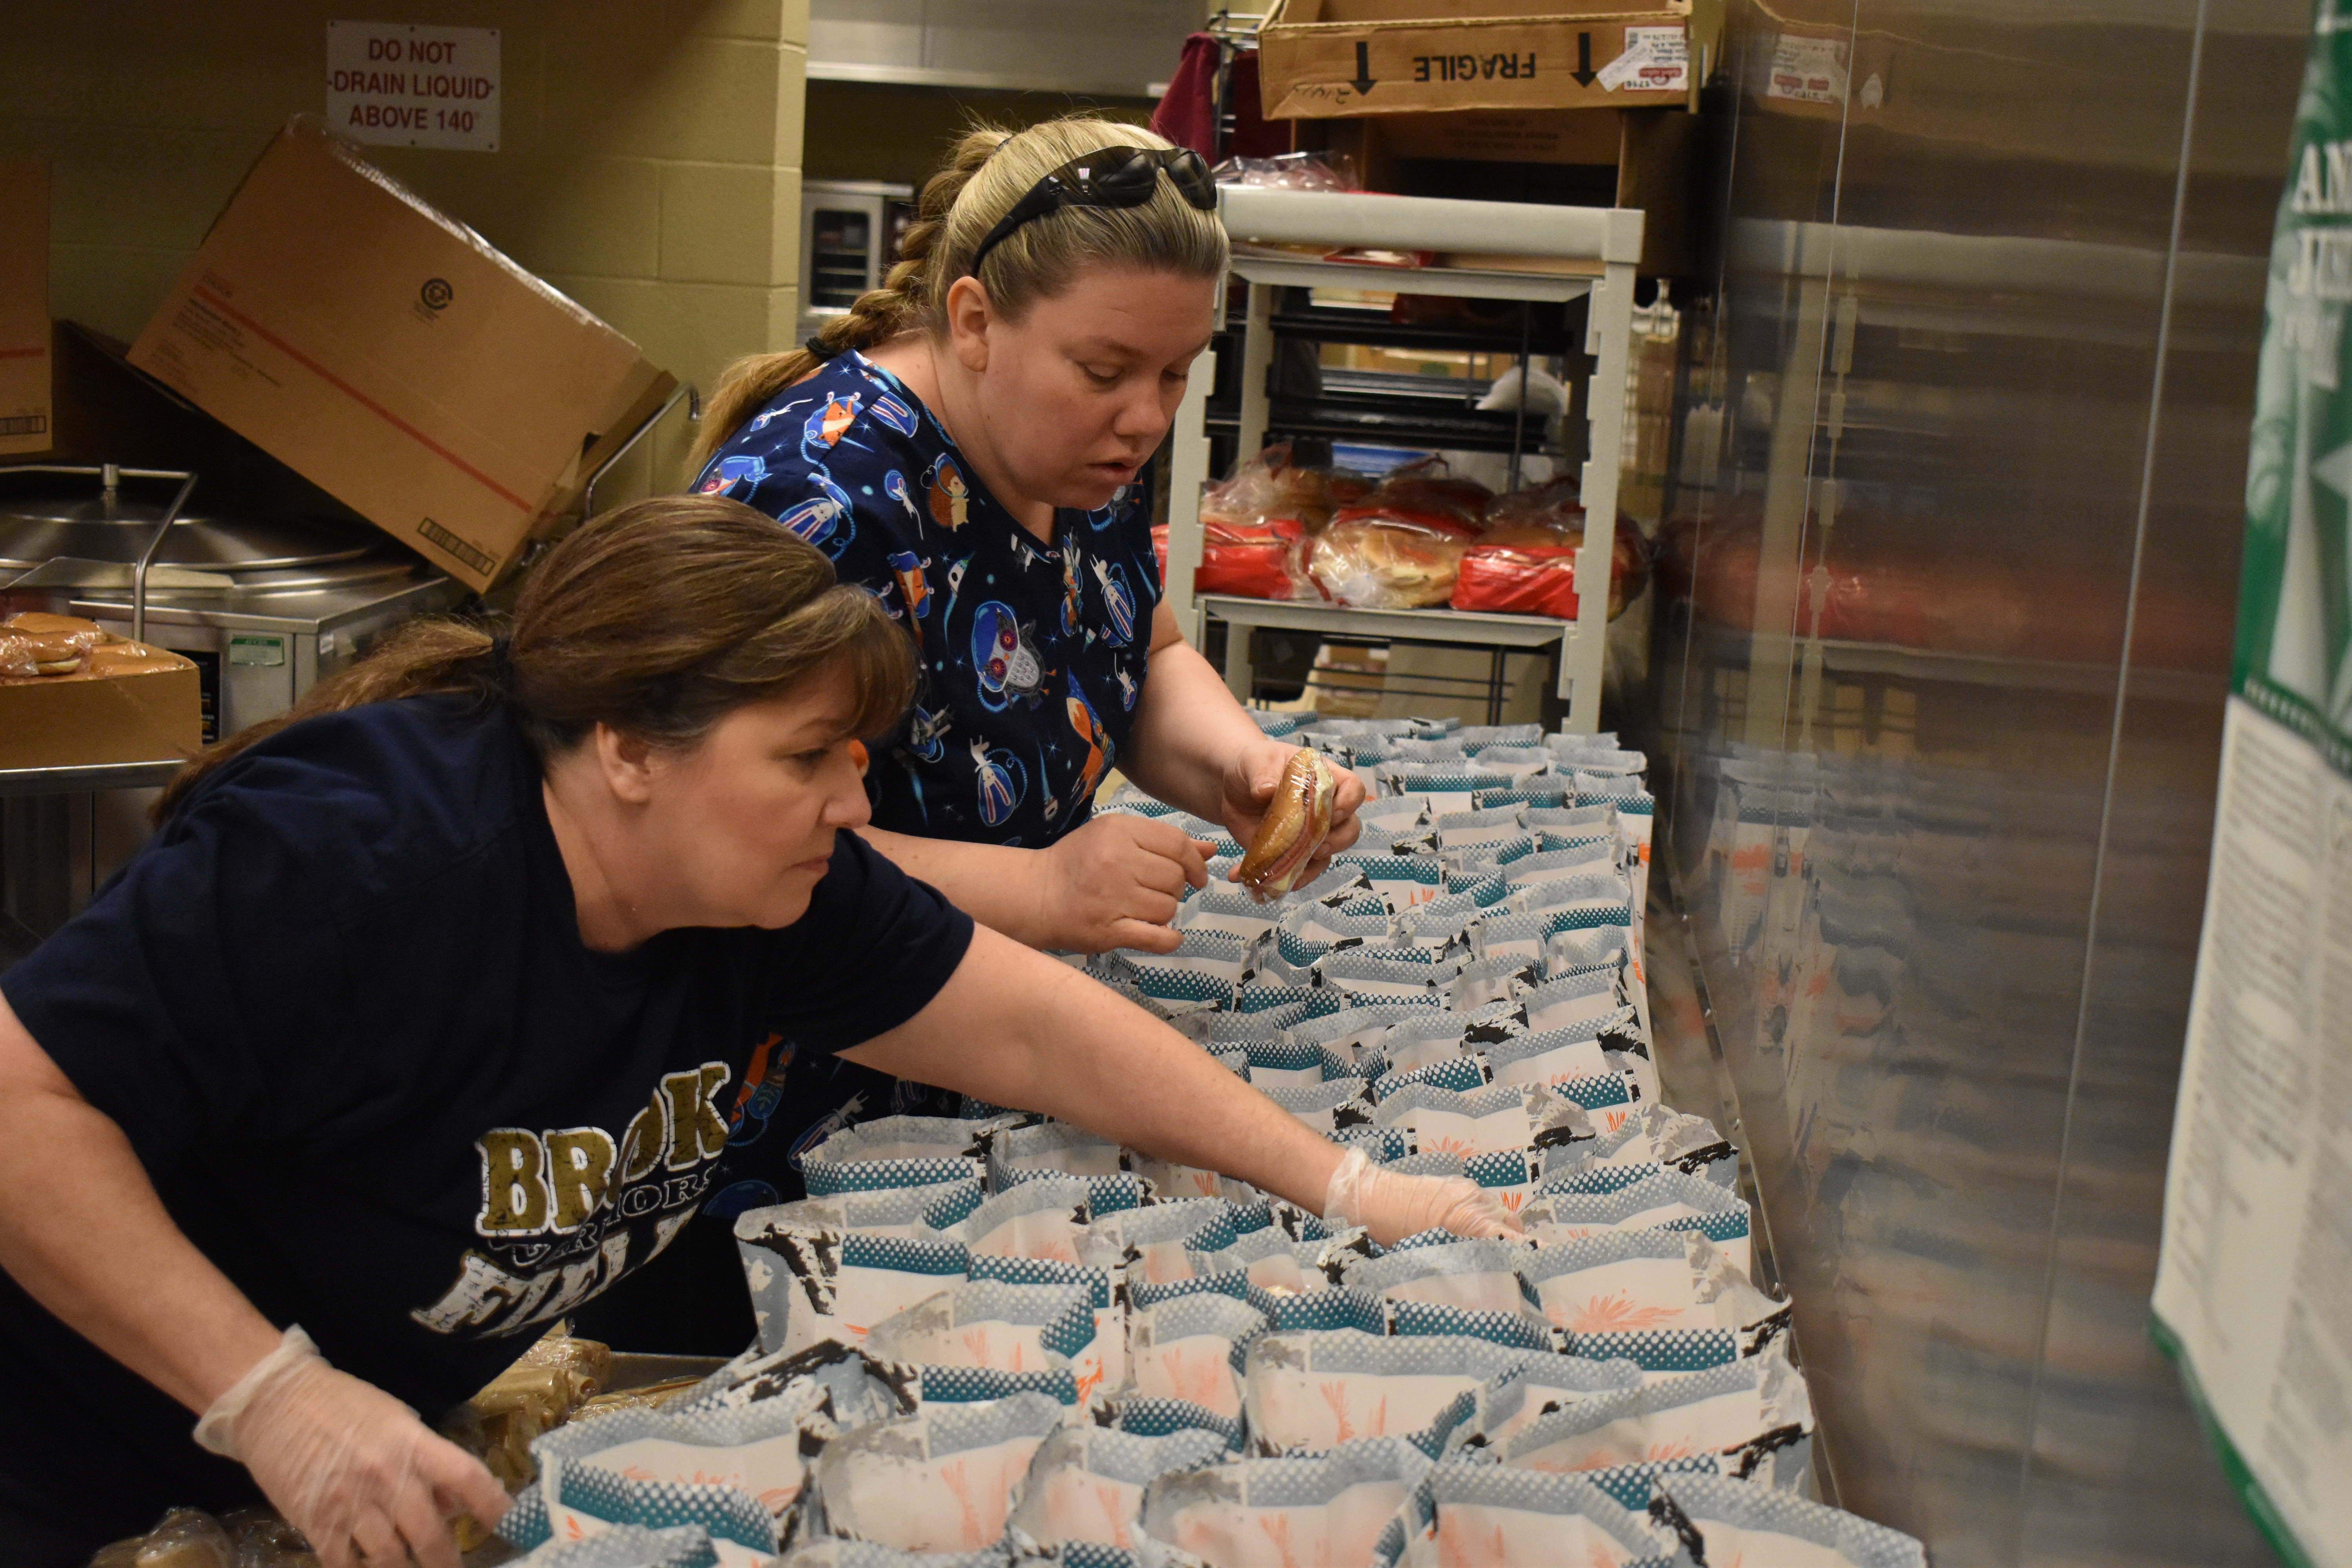 Brookfield school food service employees Chris Swanson, left, and Melissa Dean.